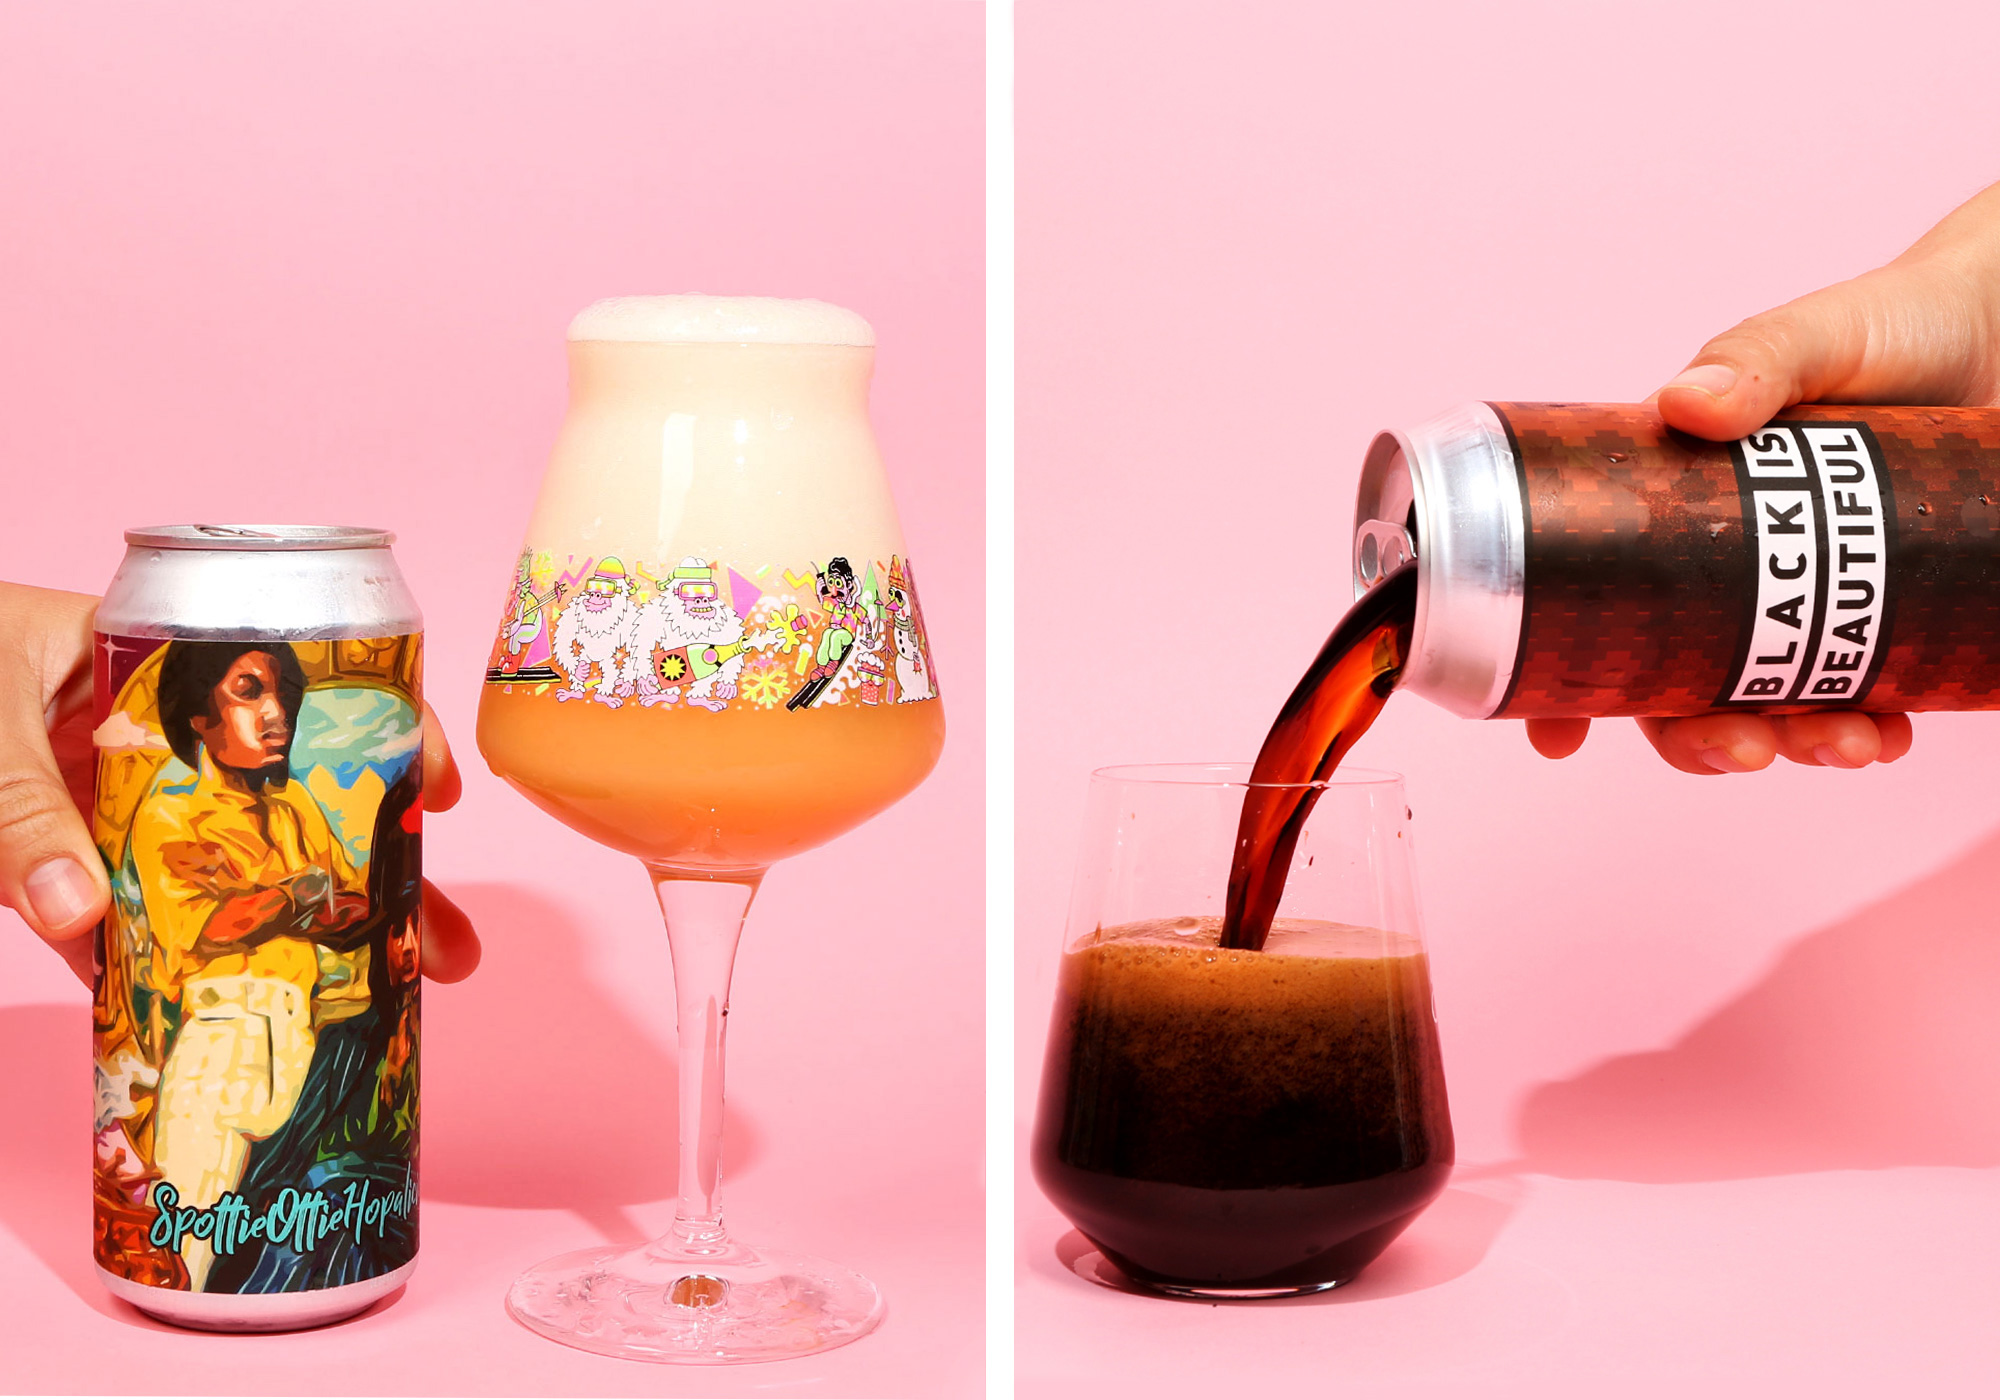 The 12 Best Craft Breweries of 2020